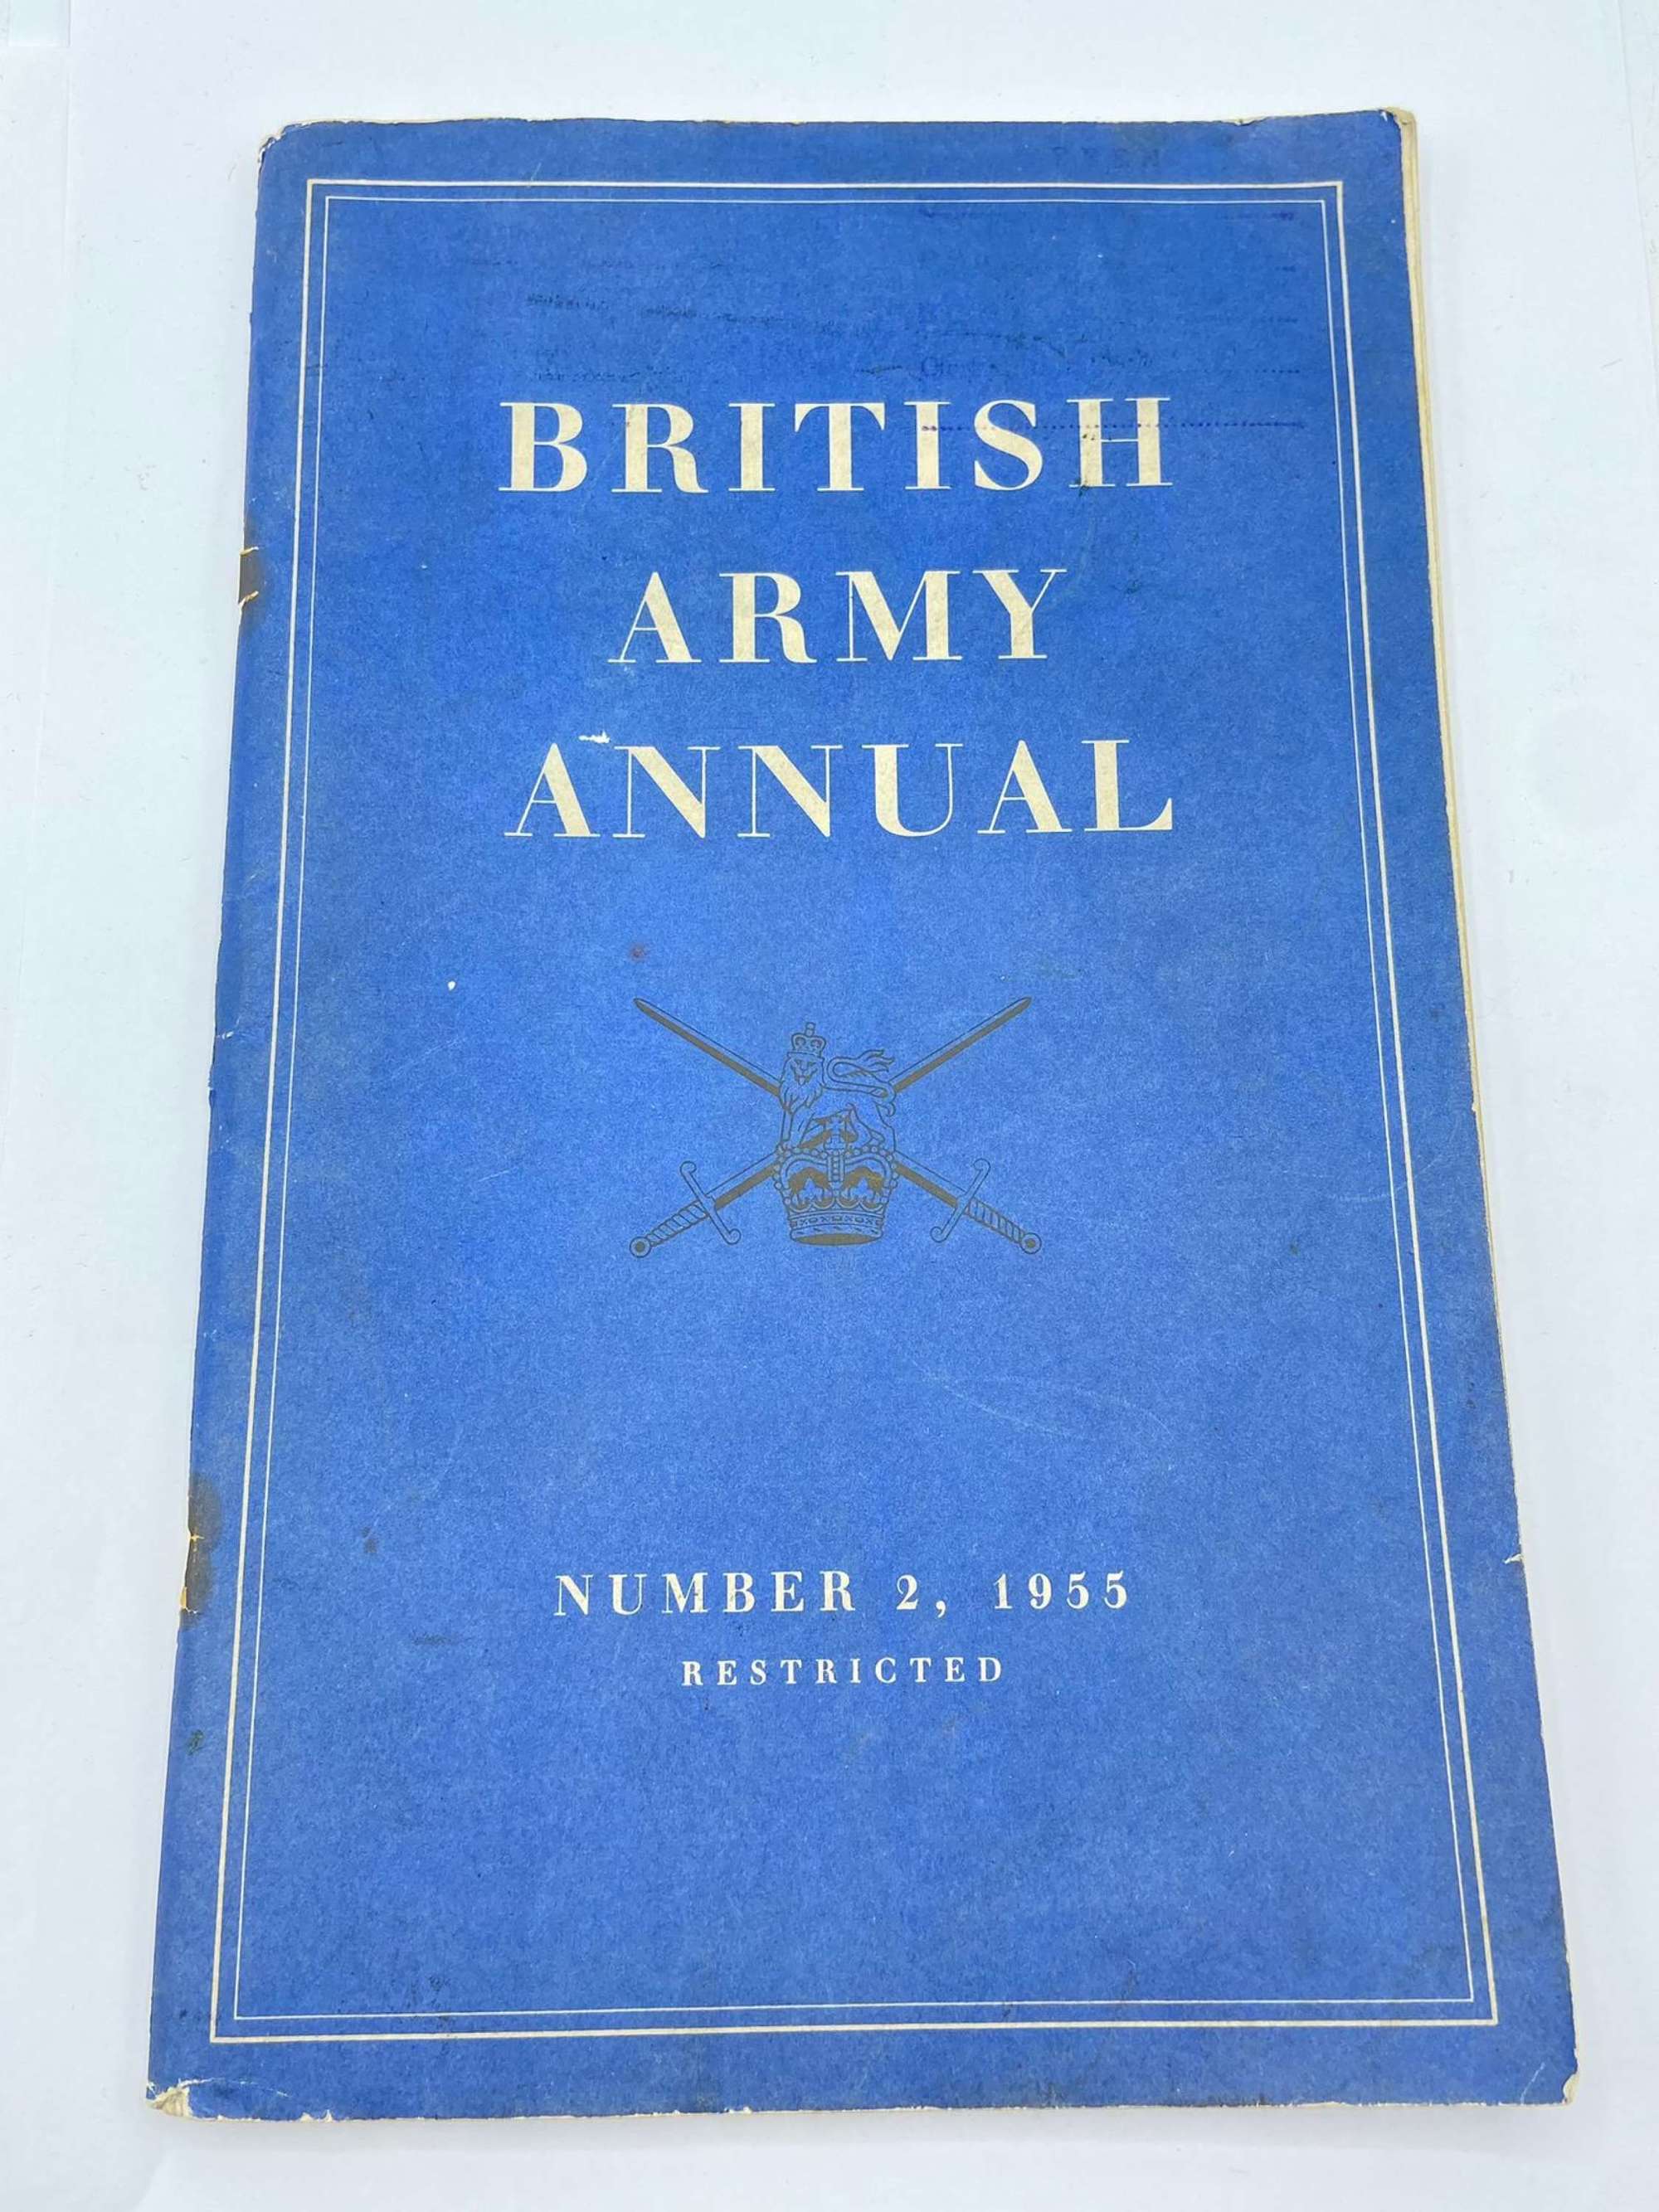 Post WW2 British Army Annual Number 2 1955 Restricted Publication